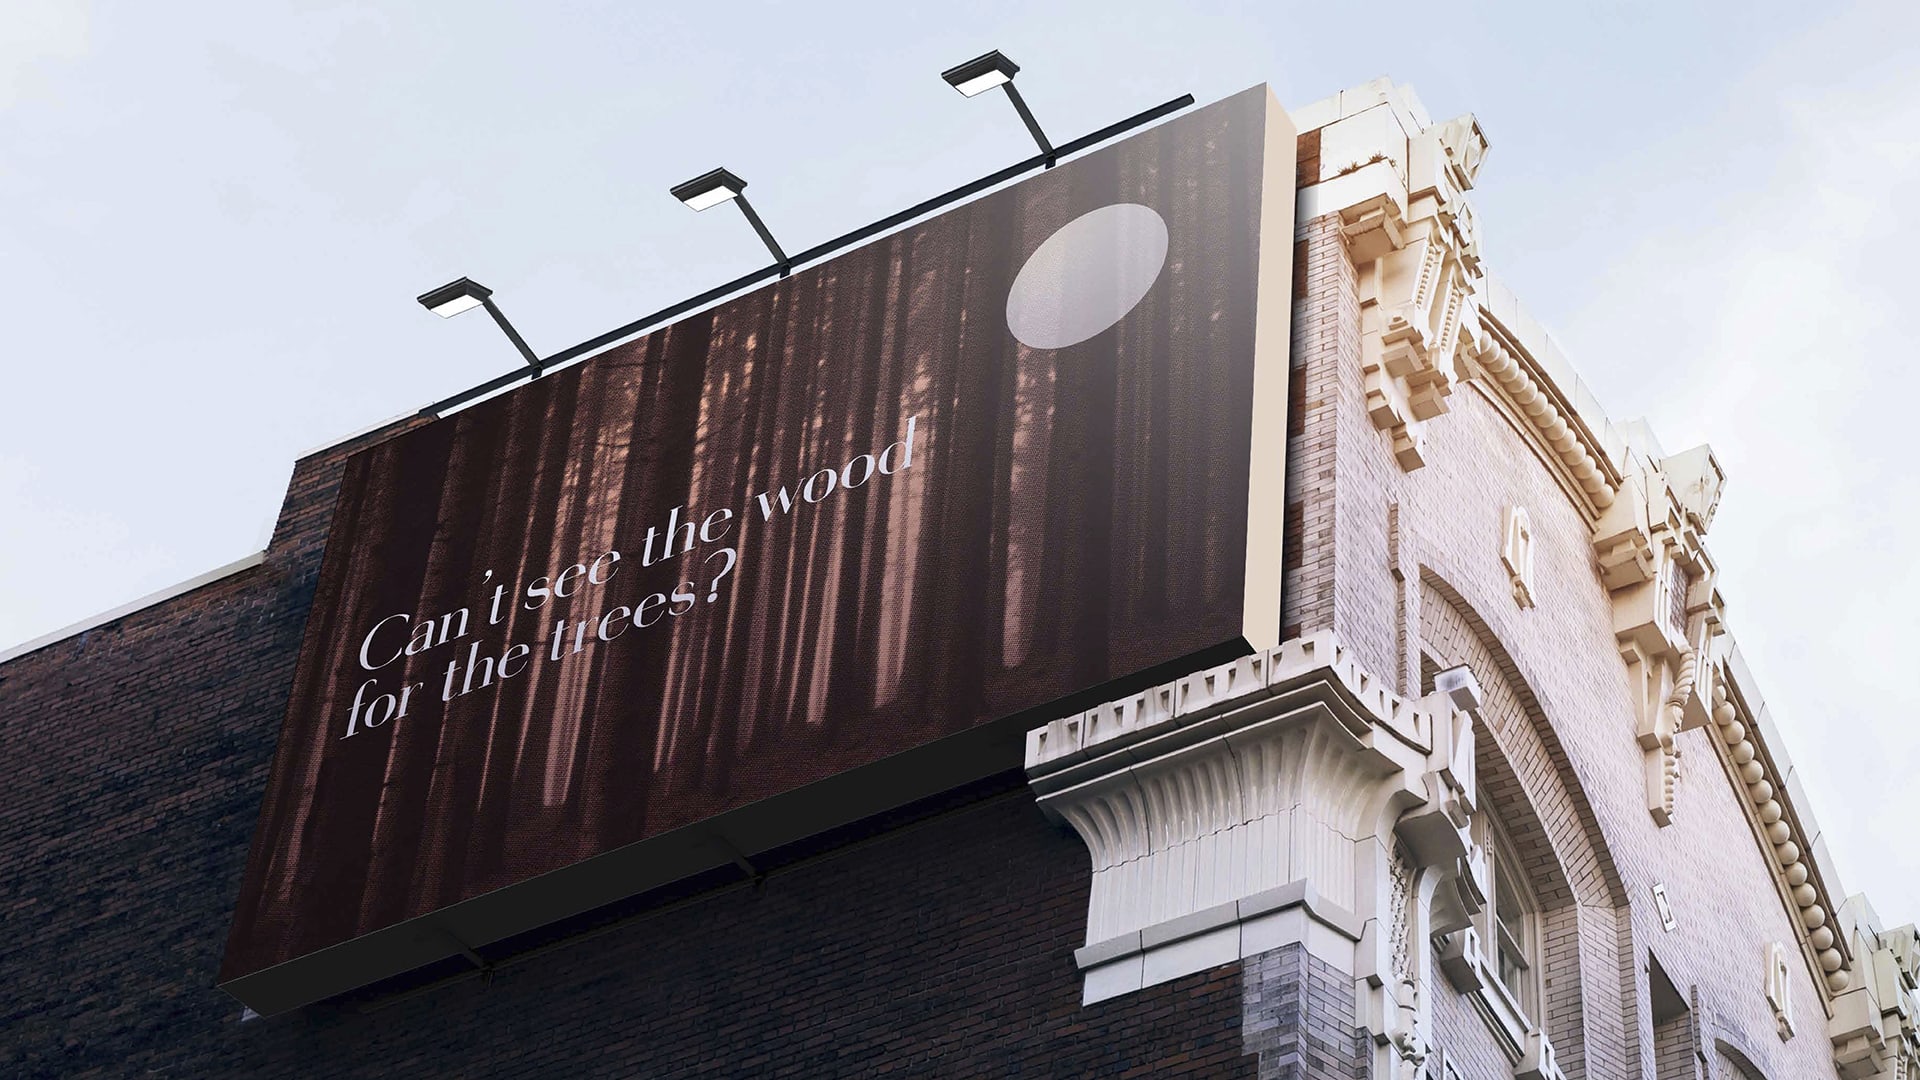 An image of a OOH advertising billboard design for a brand called Lost and Found. The design shows a forest and displays the words 'Can't see the wood for the trees?'